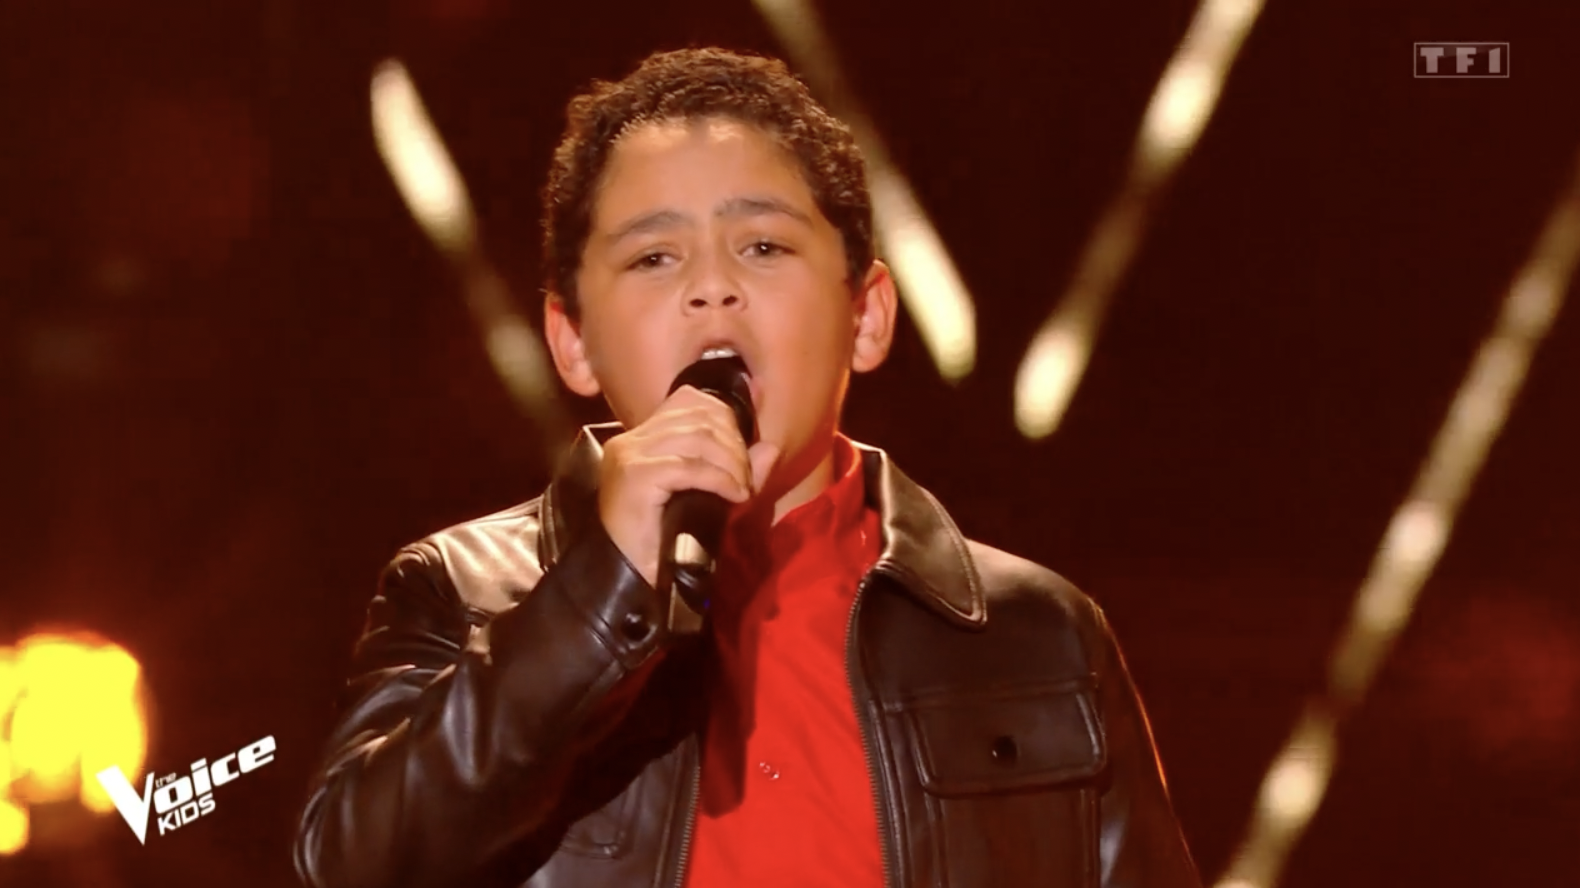 The Voice Kids : L'aventure continue pour Raynaud